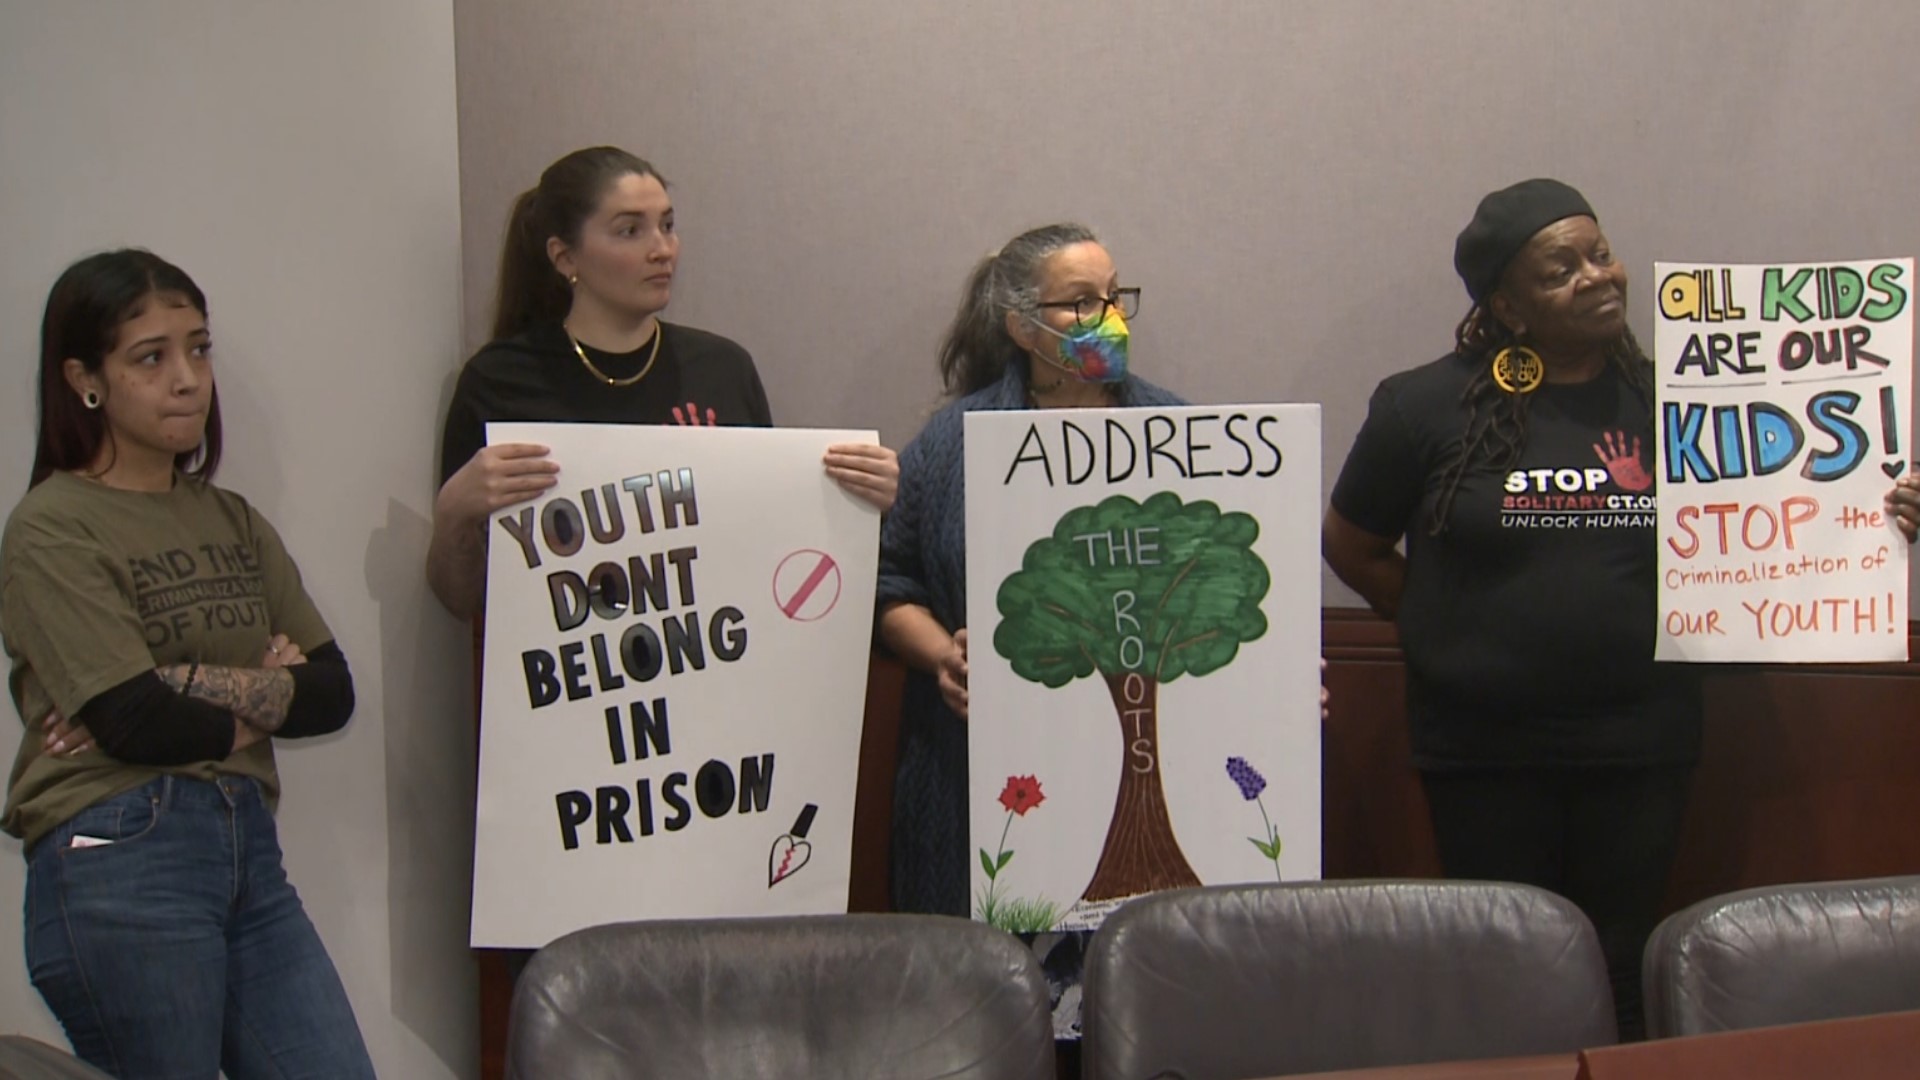 One state bill pushes for young people 18 and under to be transferred out of adult prisons, and the other bill pushes for stricter policies regarding juvenile crime.